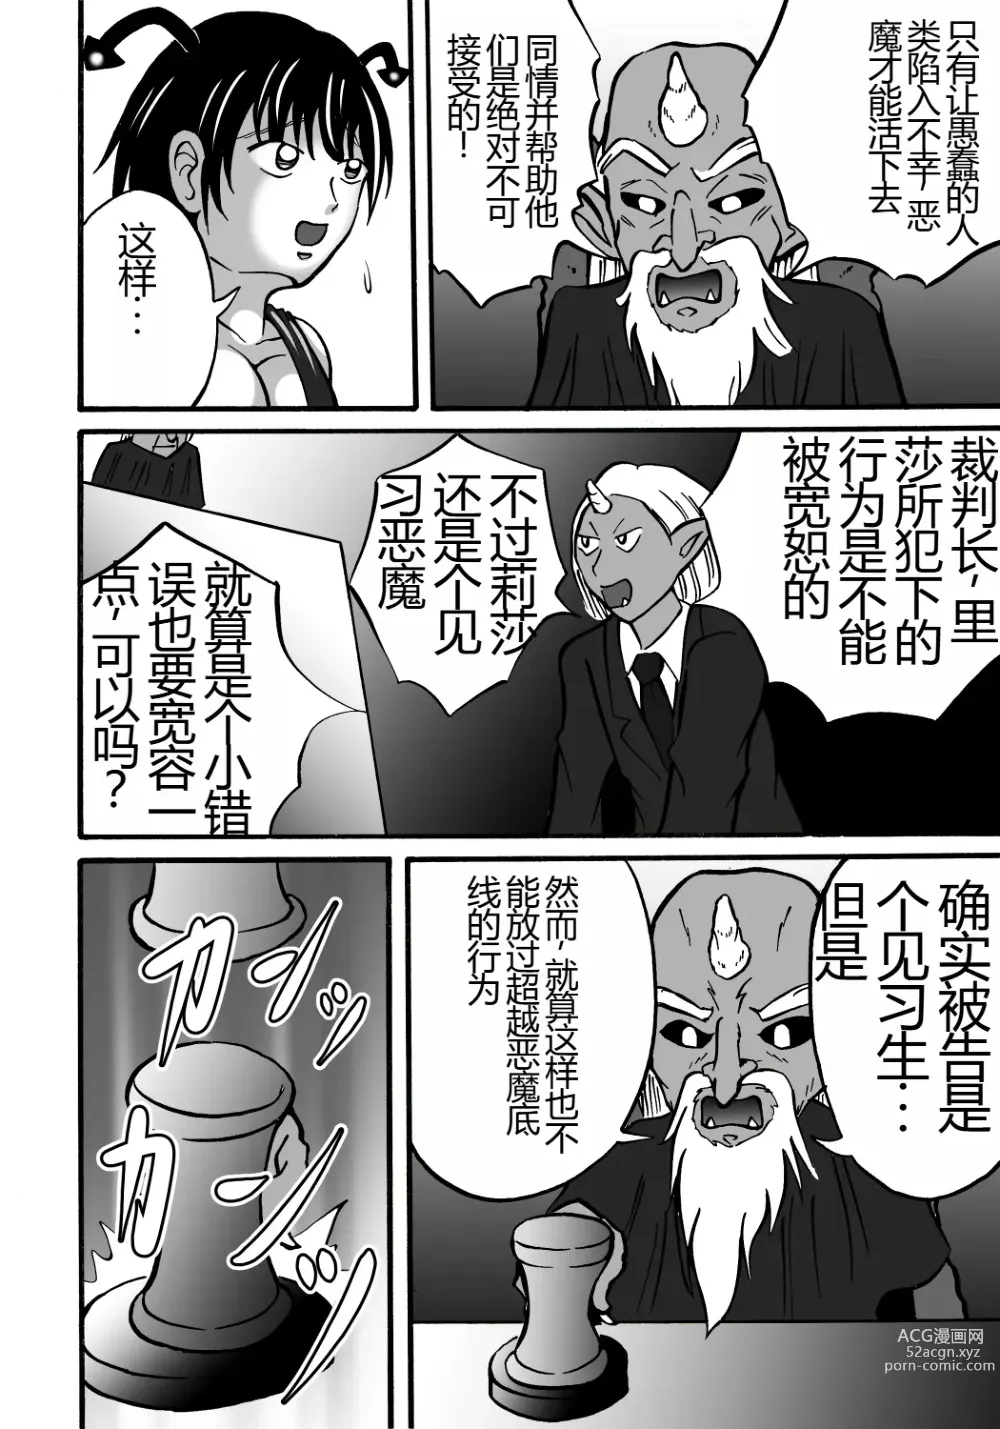 Page 6 of doujinshi 羞耻之刑罚